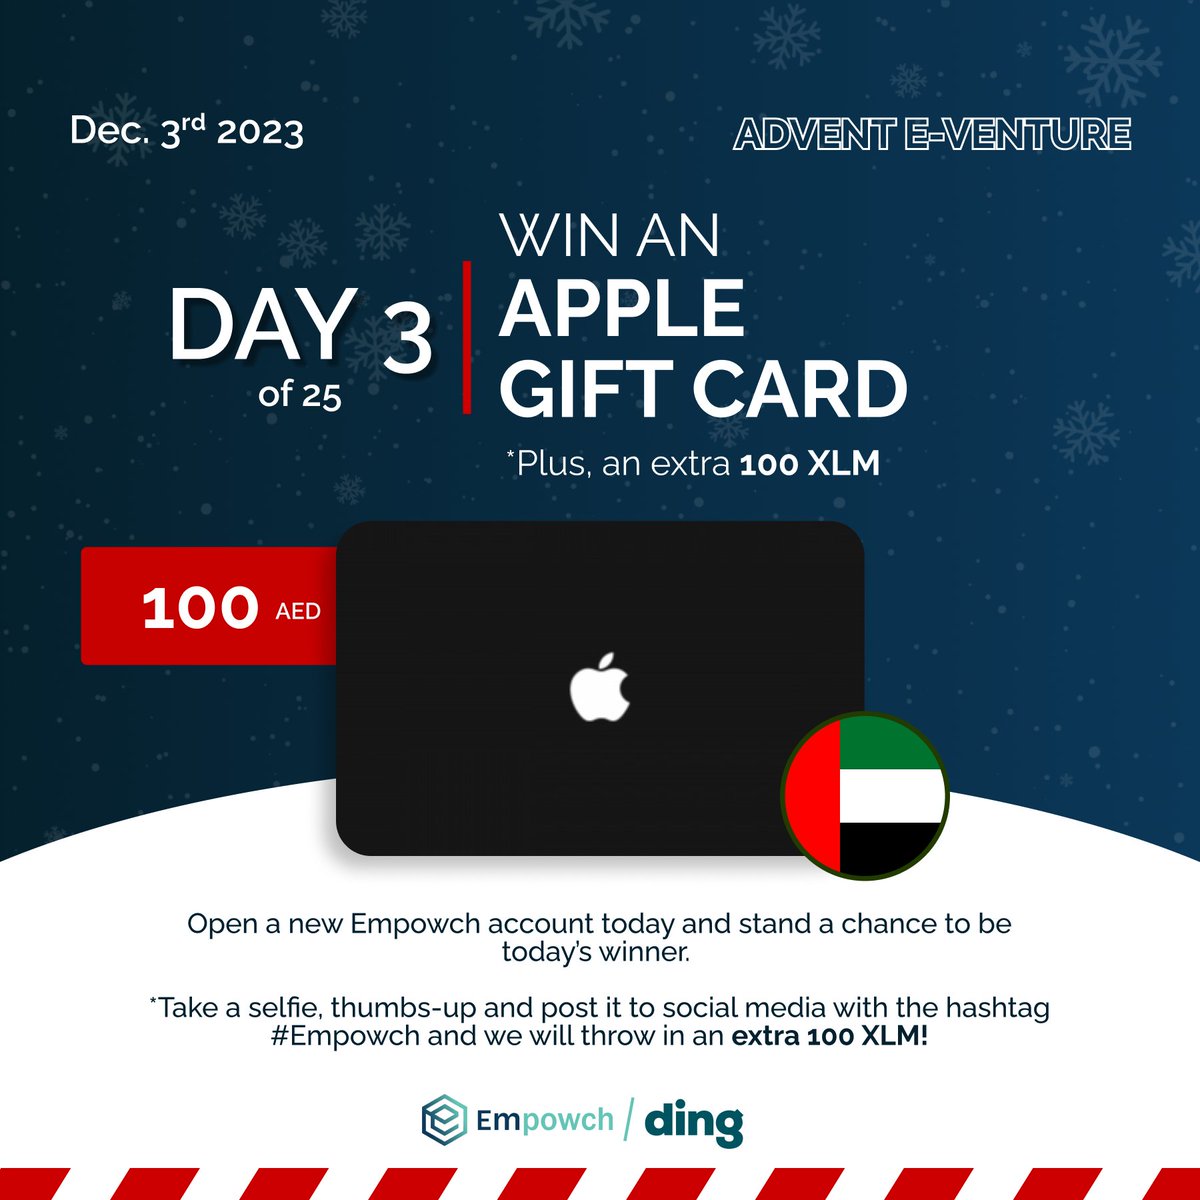 UAE - Open a new Empowch account today 03December 2023 and stand a chance to win a AED 100 gift card from Apple.  Take a selfie with a thumbs-up post it to social media and add #Empowch and we will throw in an extra 100 XLM!  #AppleGiftCard #empowch #UAE #XLM